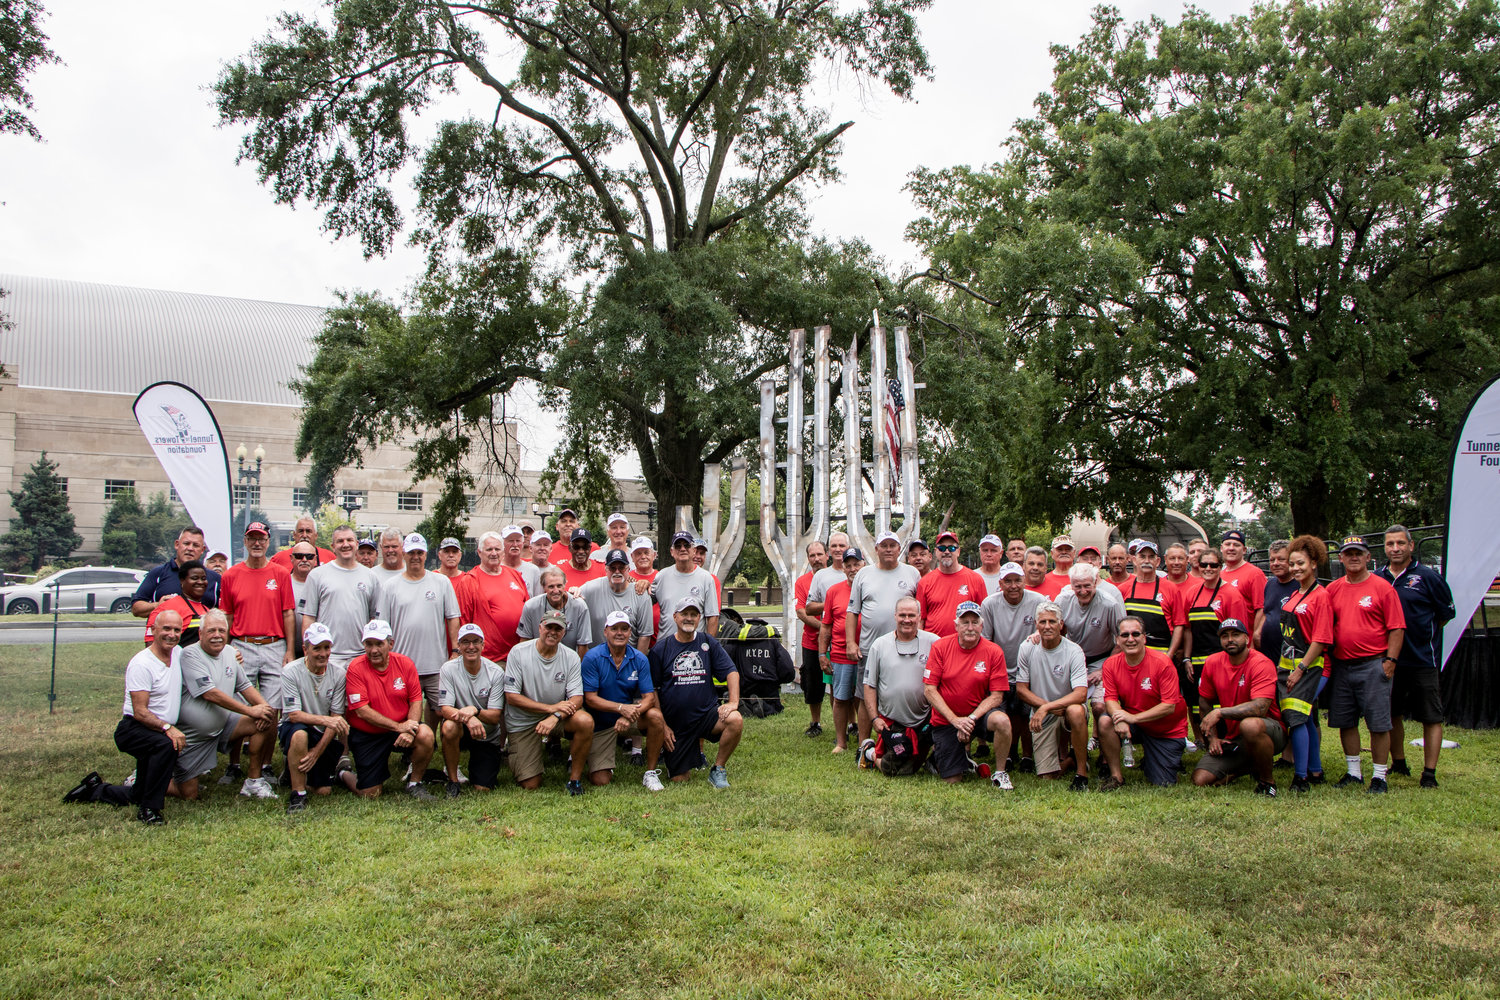 The Tunnel to Towers Foundation kicked off Frank Siller’s 537-mile trek from the Pentagon to the World Trade Center with a barbecue in Washington, D.C., on July 31.